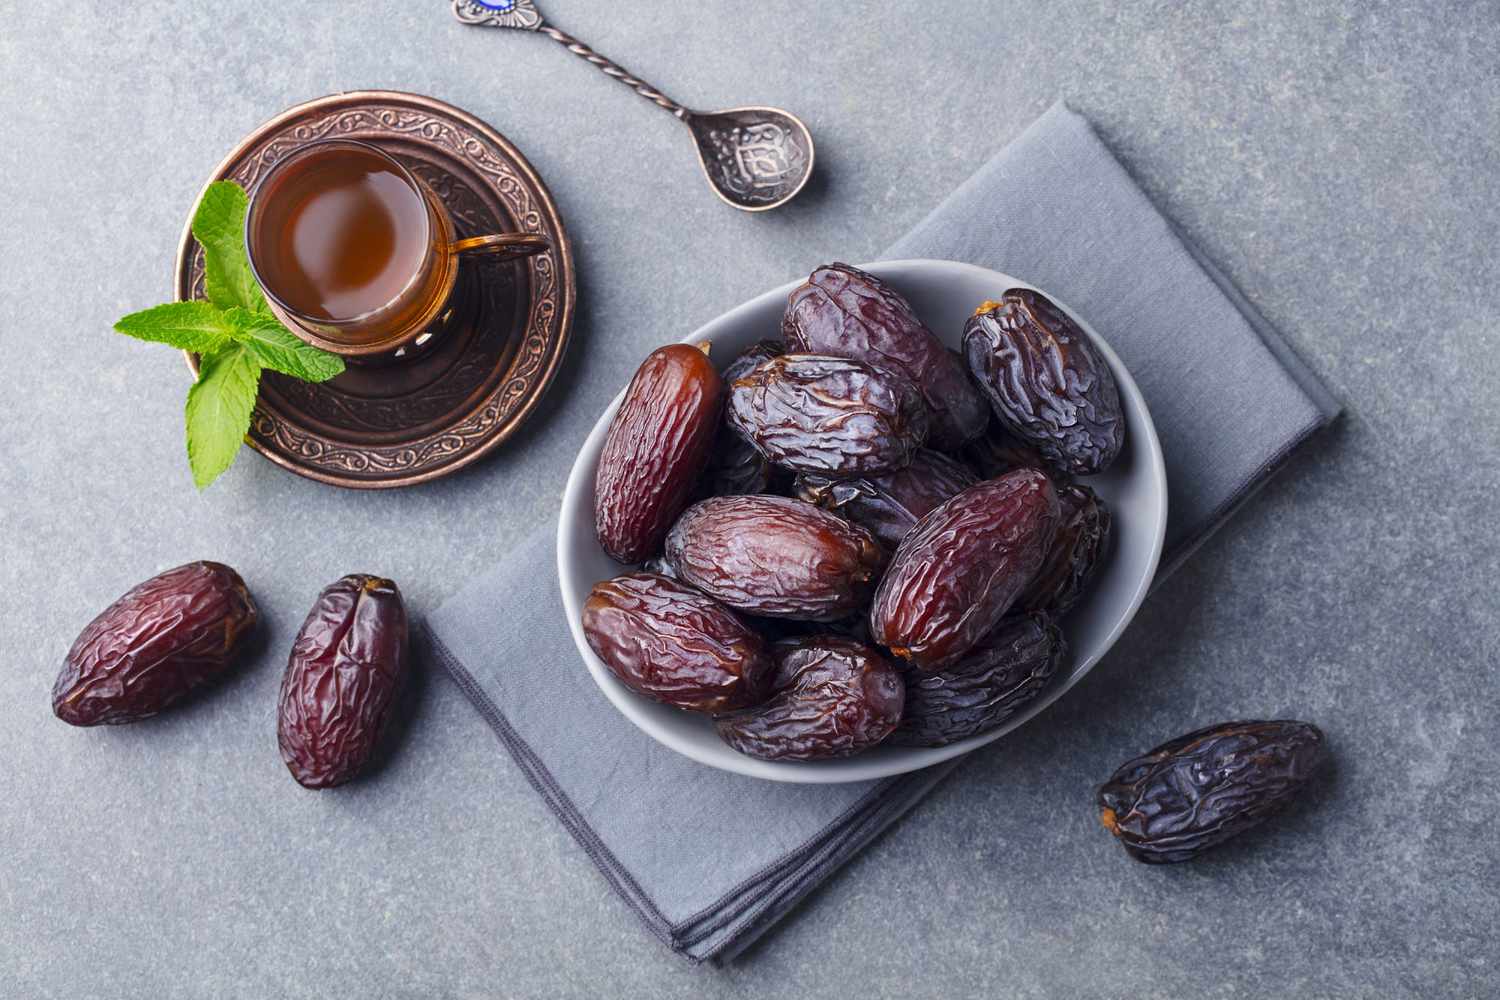 How To Store Medjool Dates